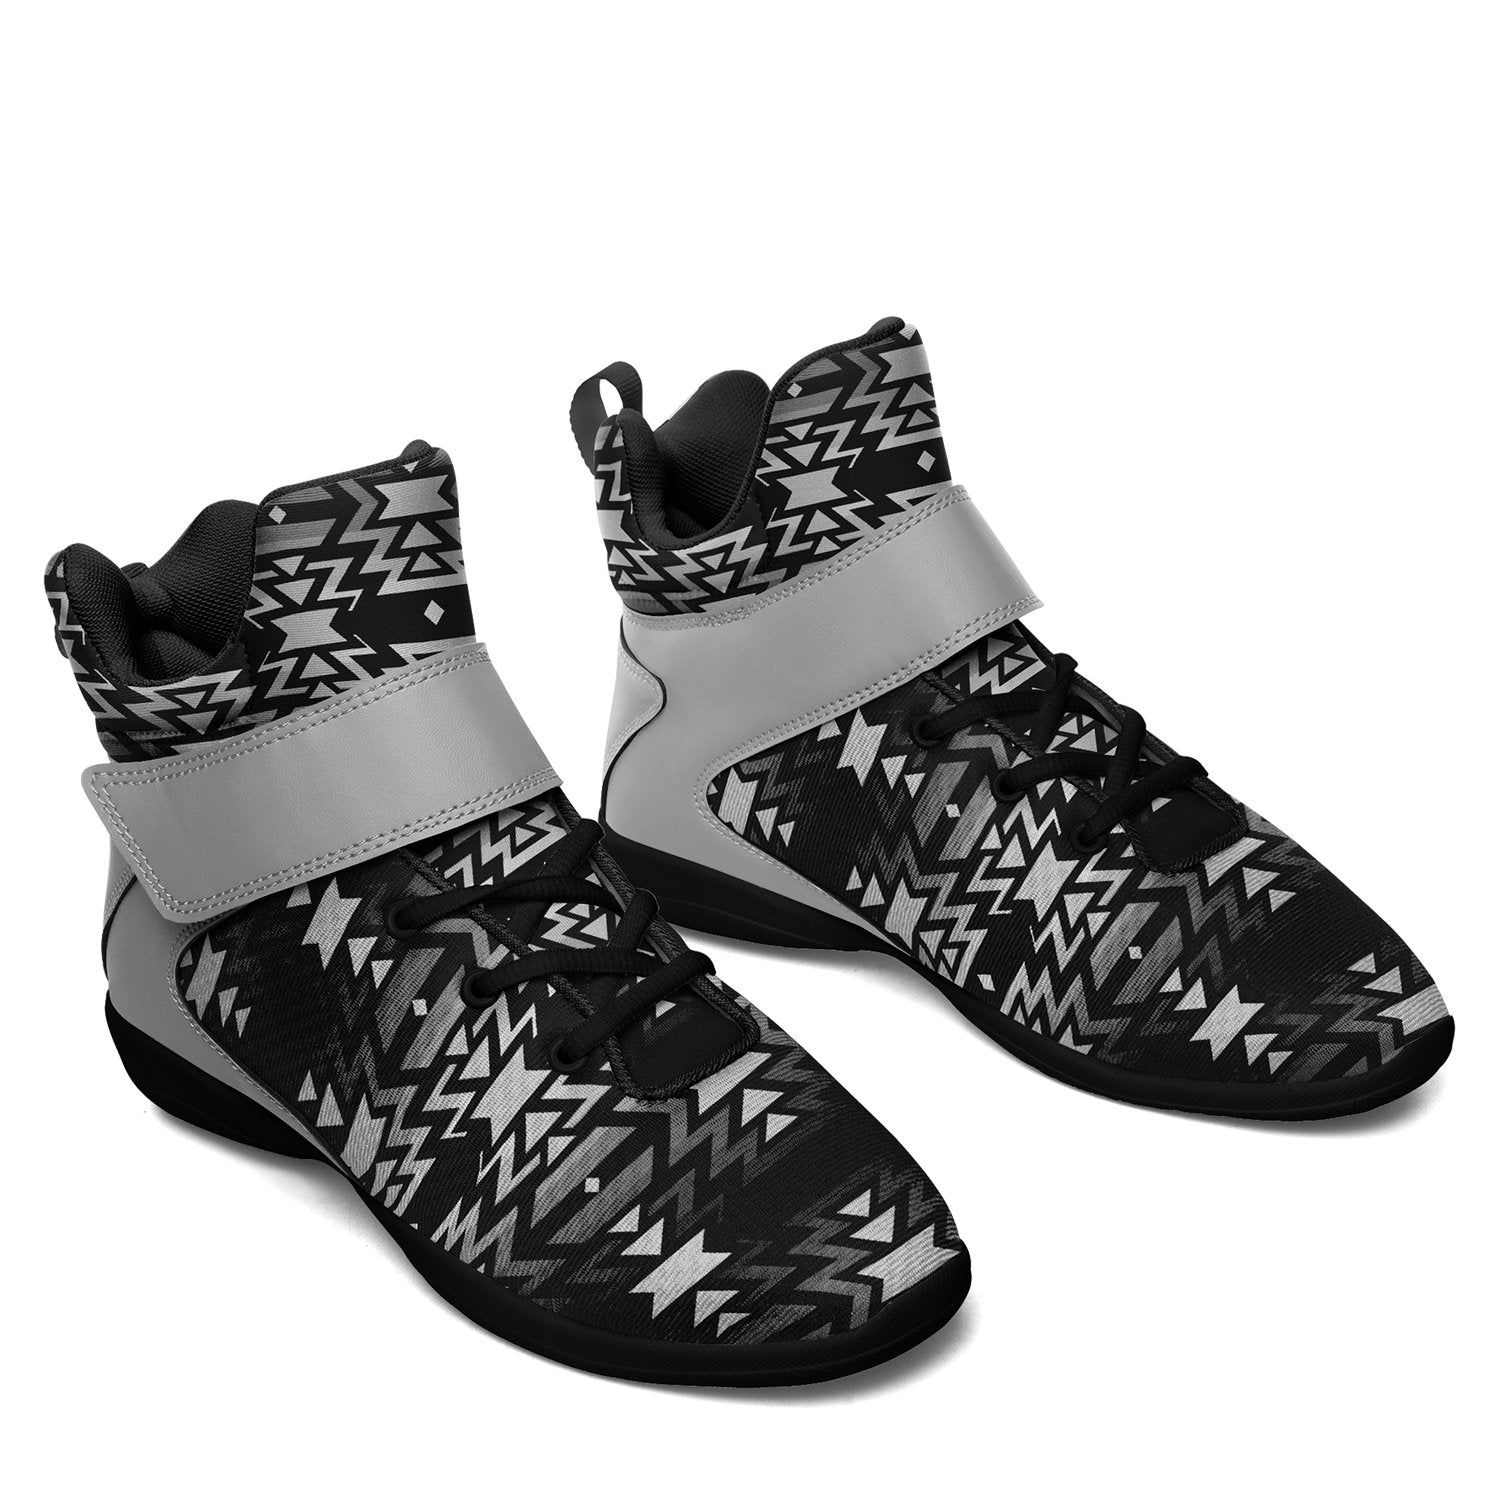 Black Fire Black and White Ipottaa Basketball / Sport High Top Shoes 49 Dzine 